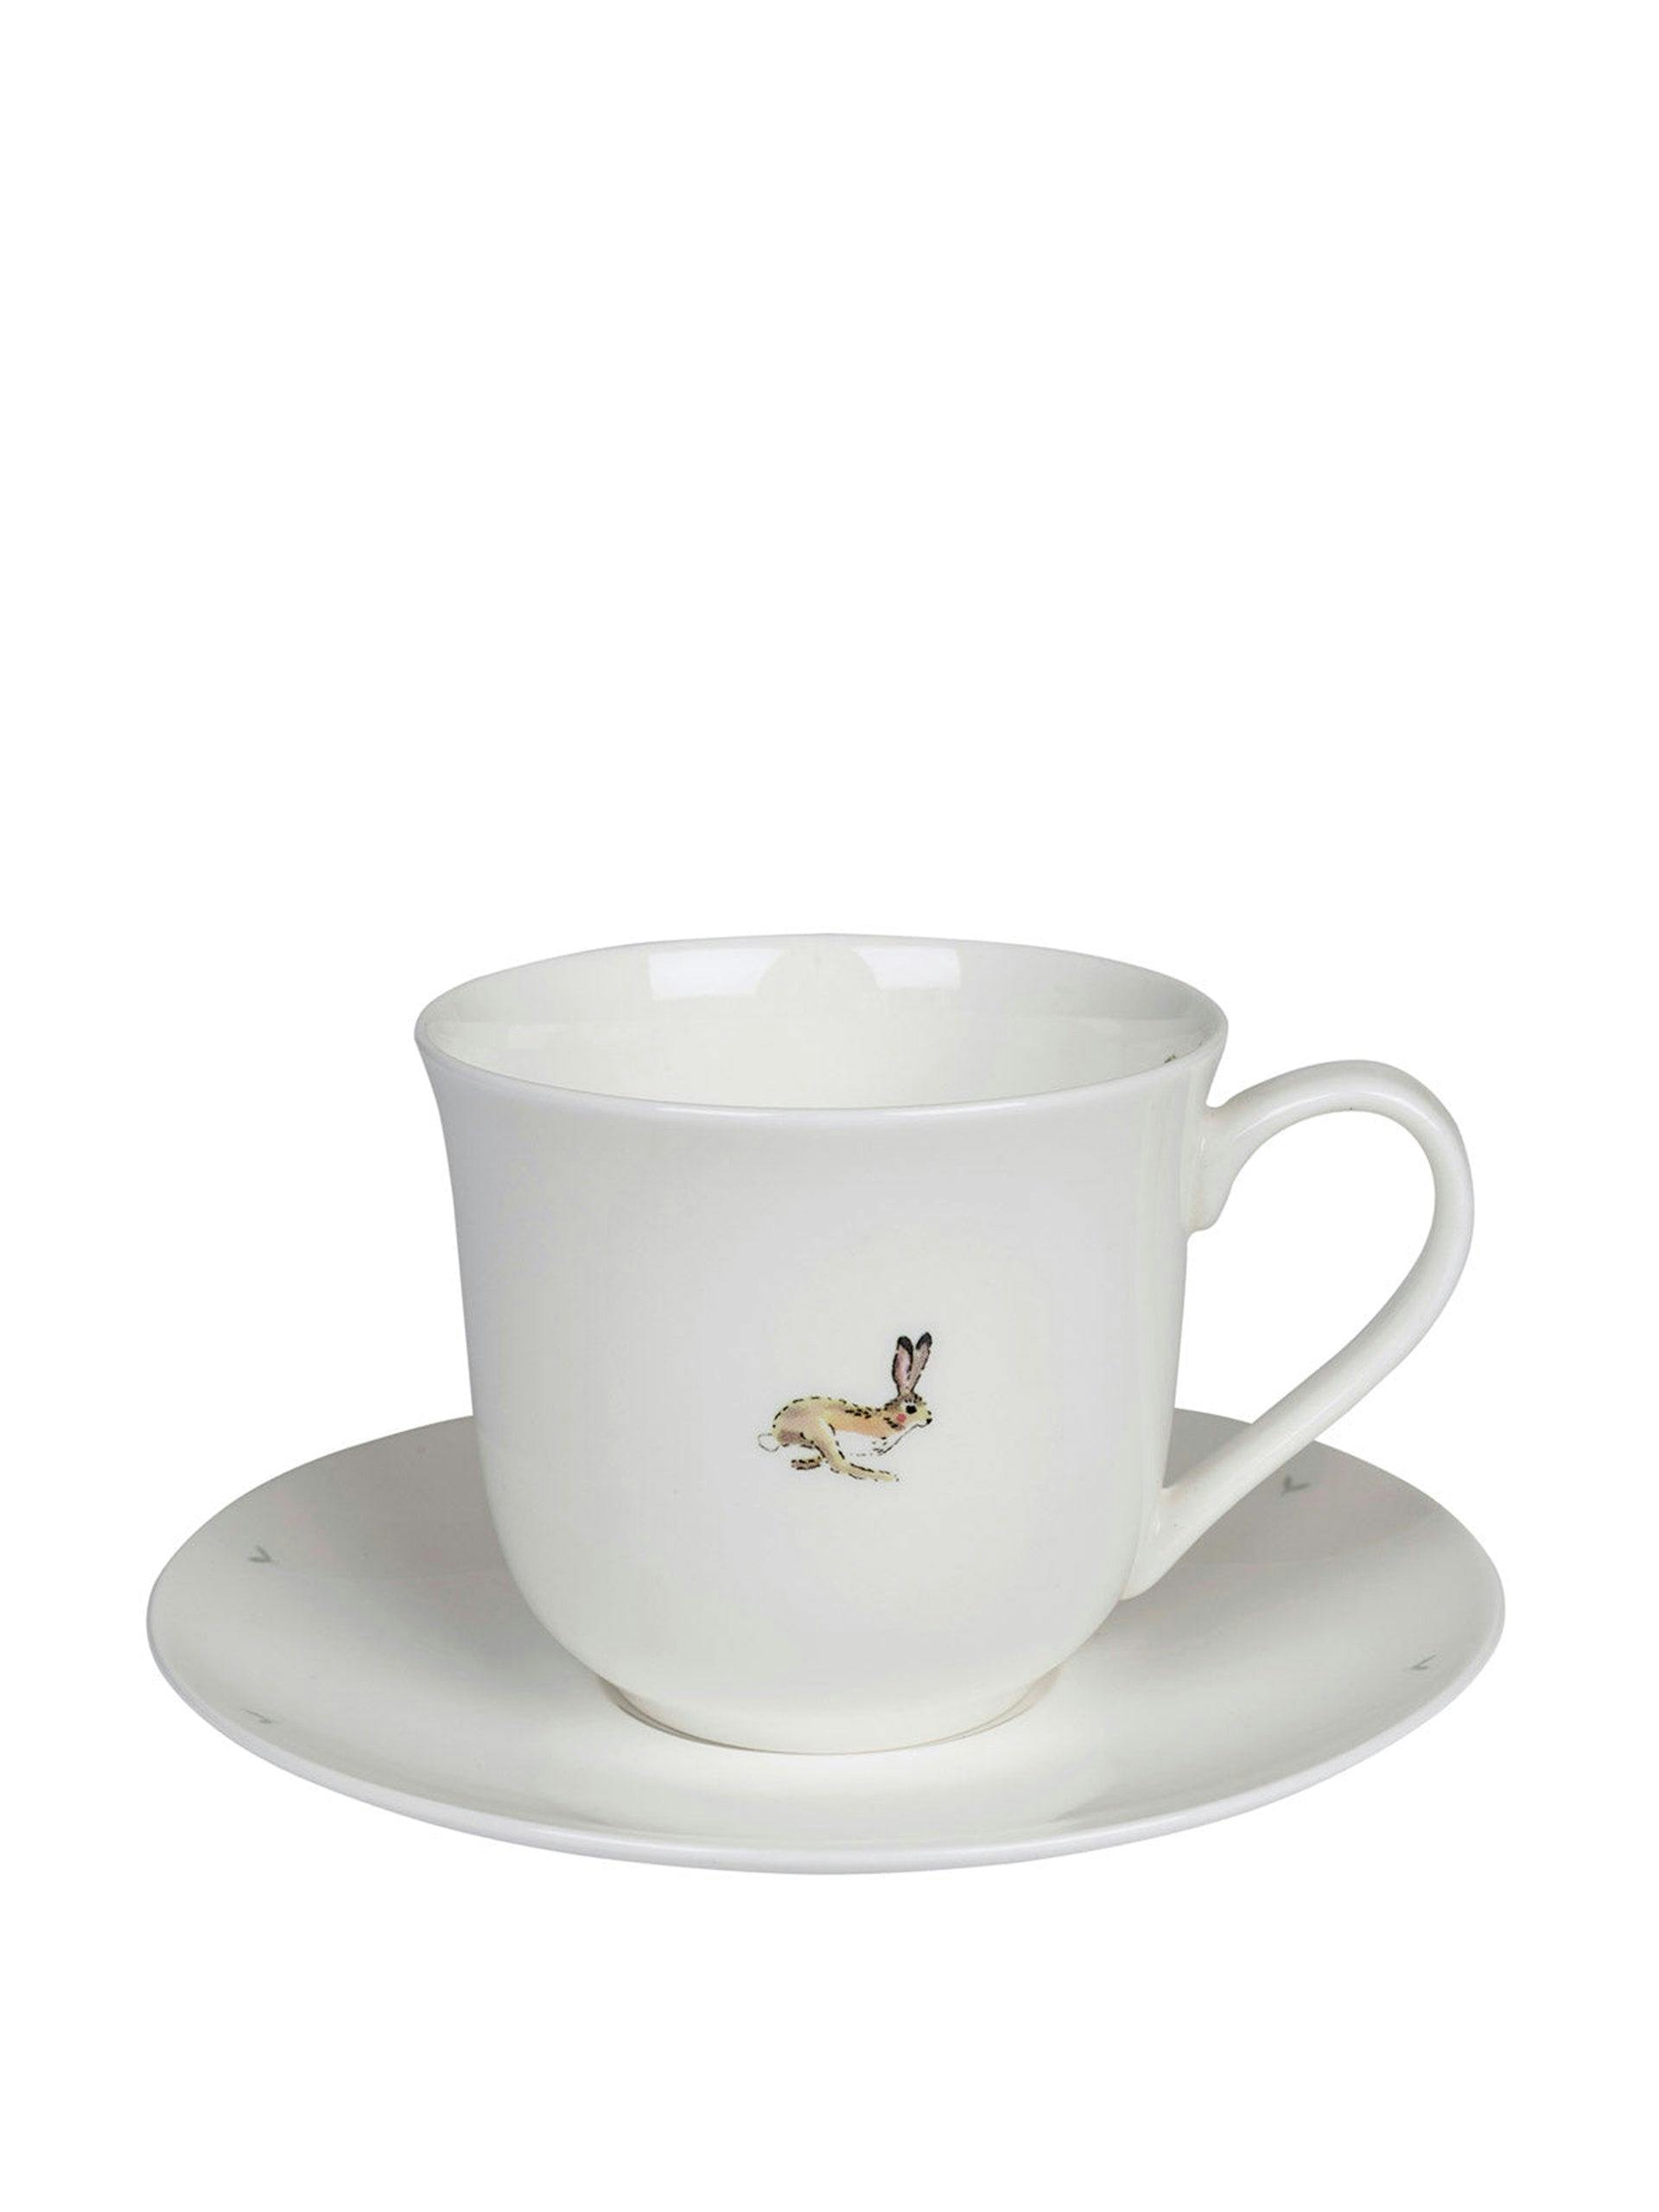 Hare teacup and saucer